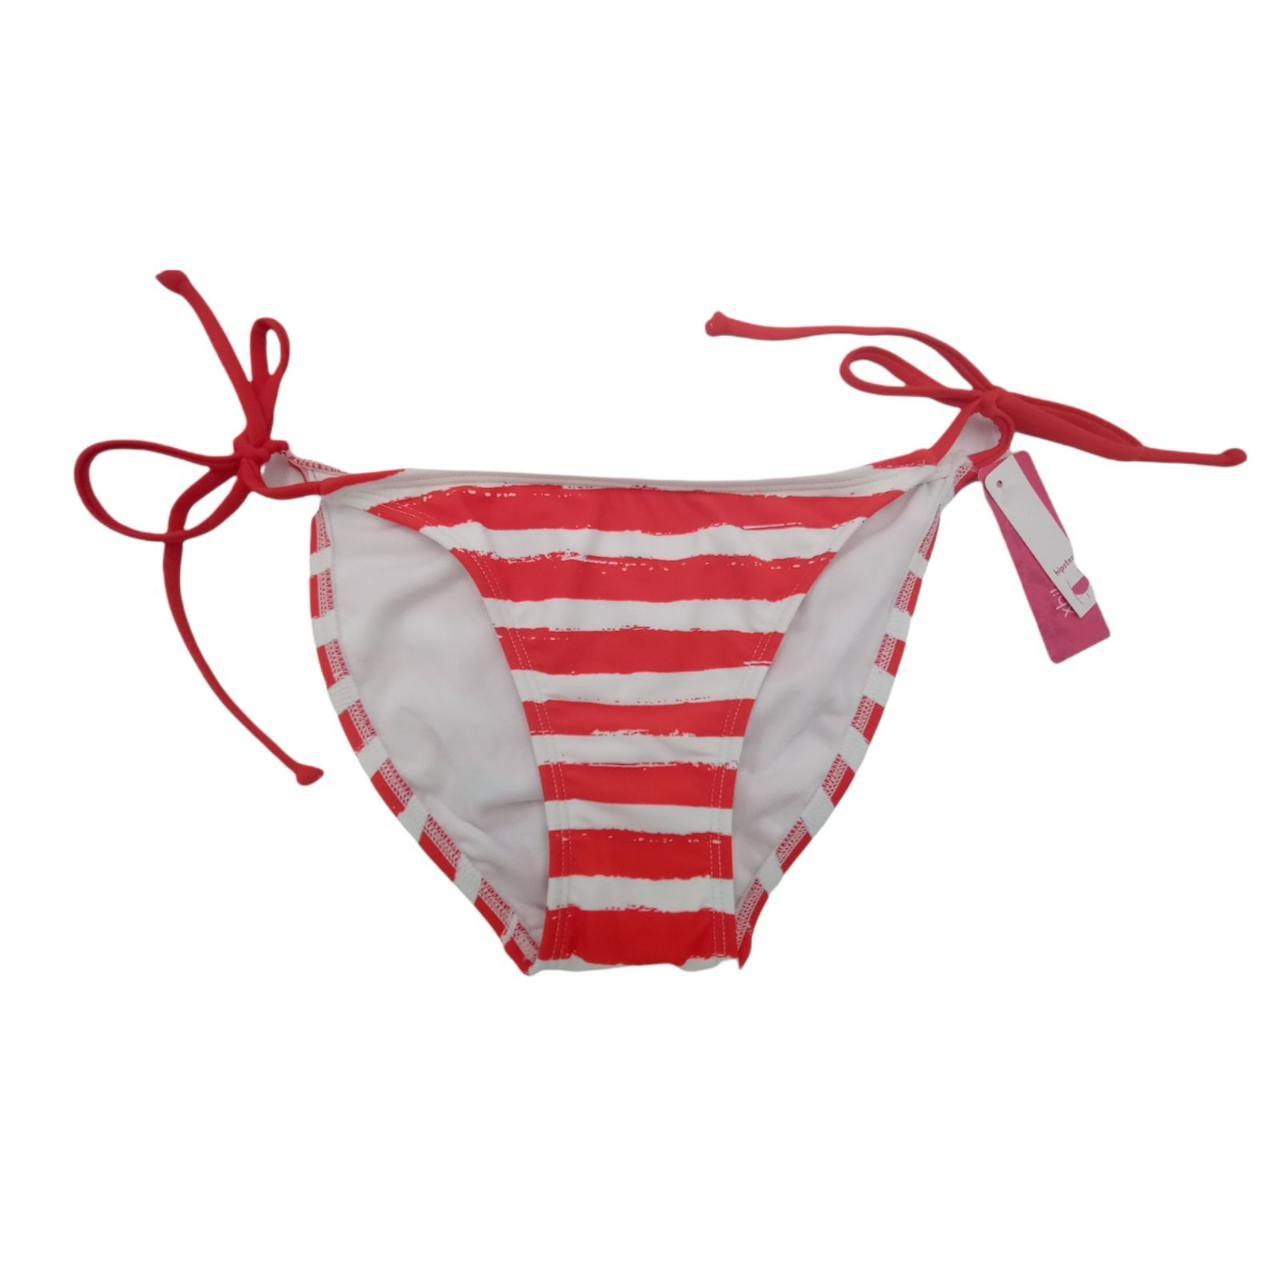 Xhilaration Women's Red and White